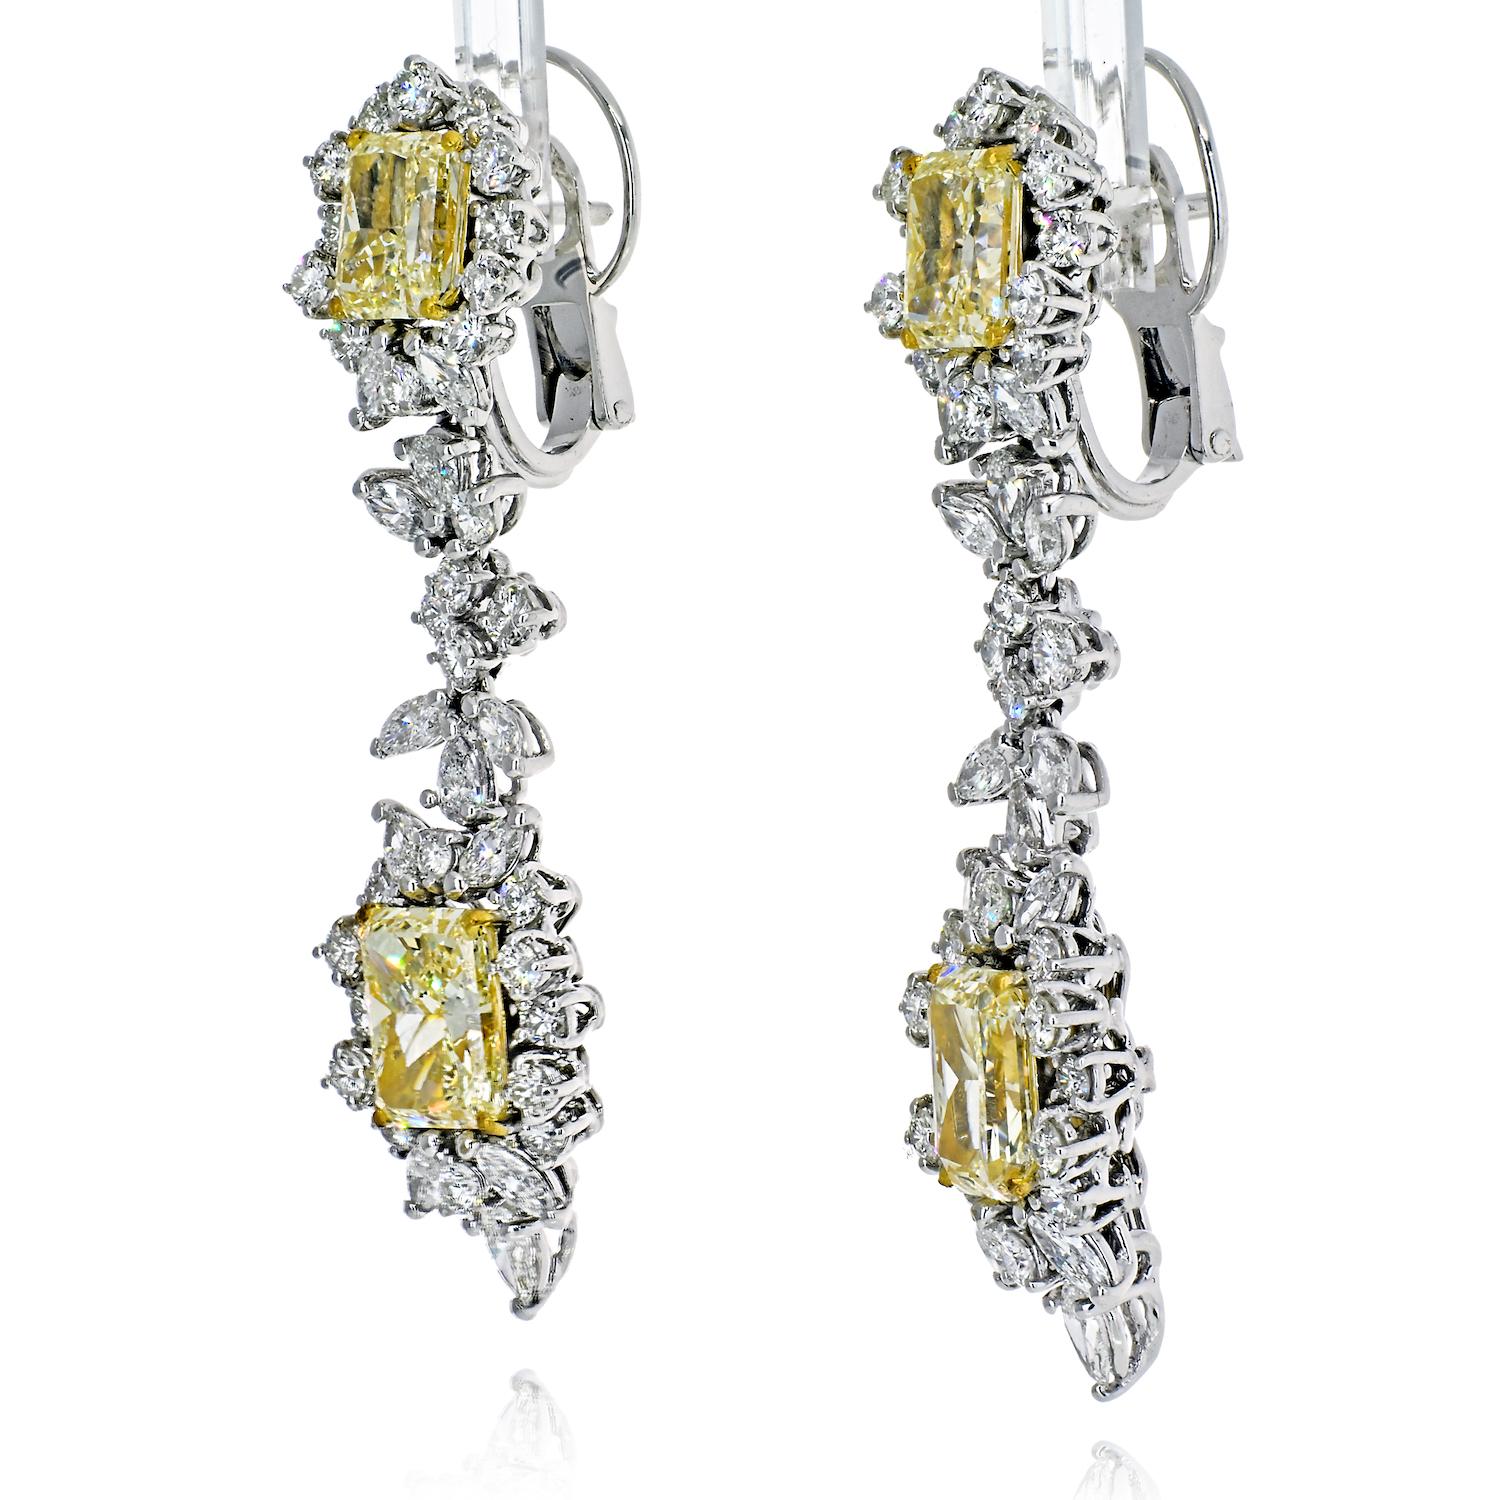 Exceptional Yellow and White Diamond Earrings centering four Radiant-Cut Yellow Diamonds of VVS1/VVS2 clarity totaling 10.75 Carats, framed by an additional 7.68 Carats of Marquis Cut, Pear Shape, and Round-Brilliant Cut Diamonds, and set in 25.1